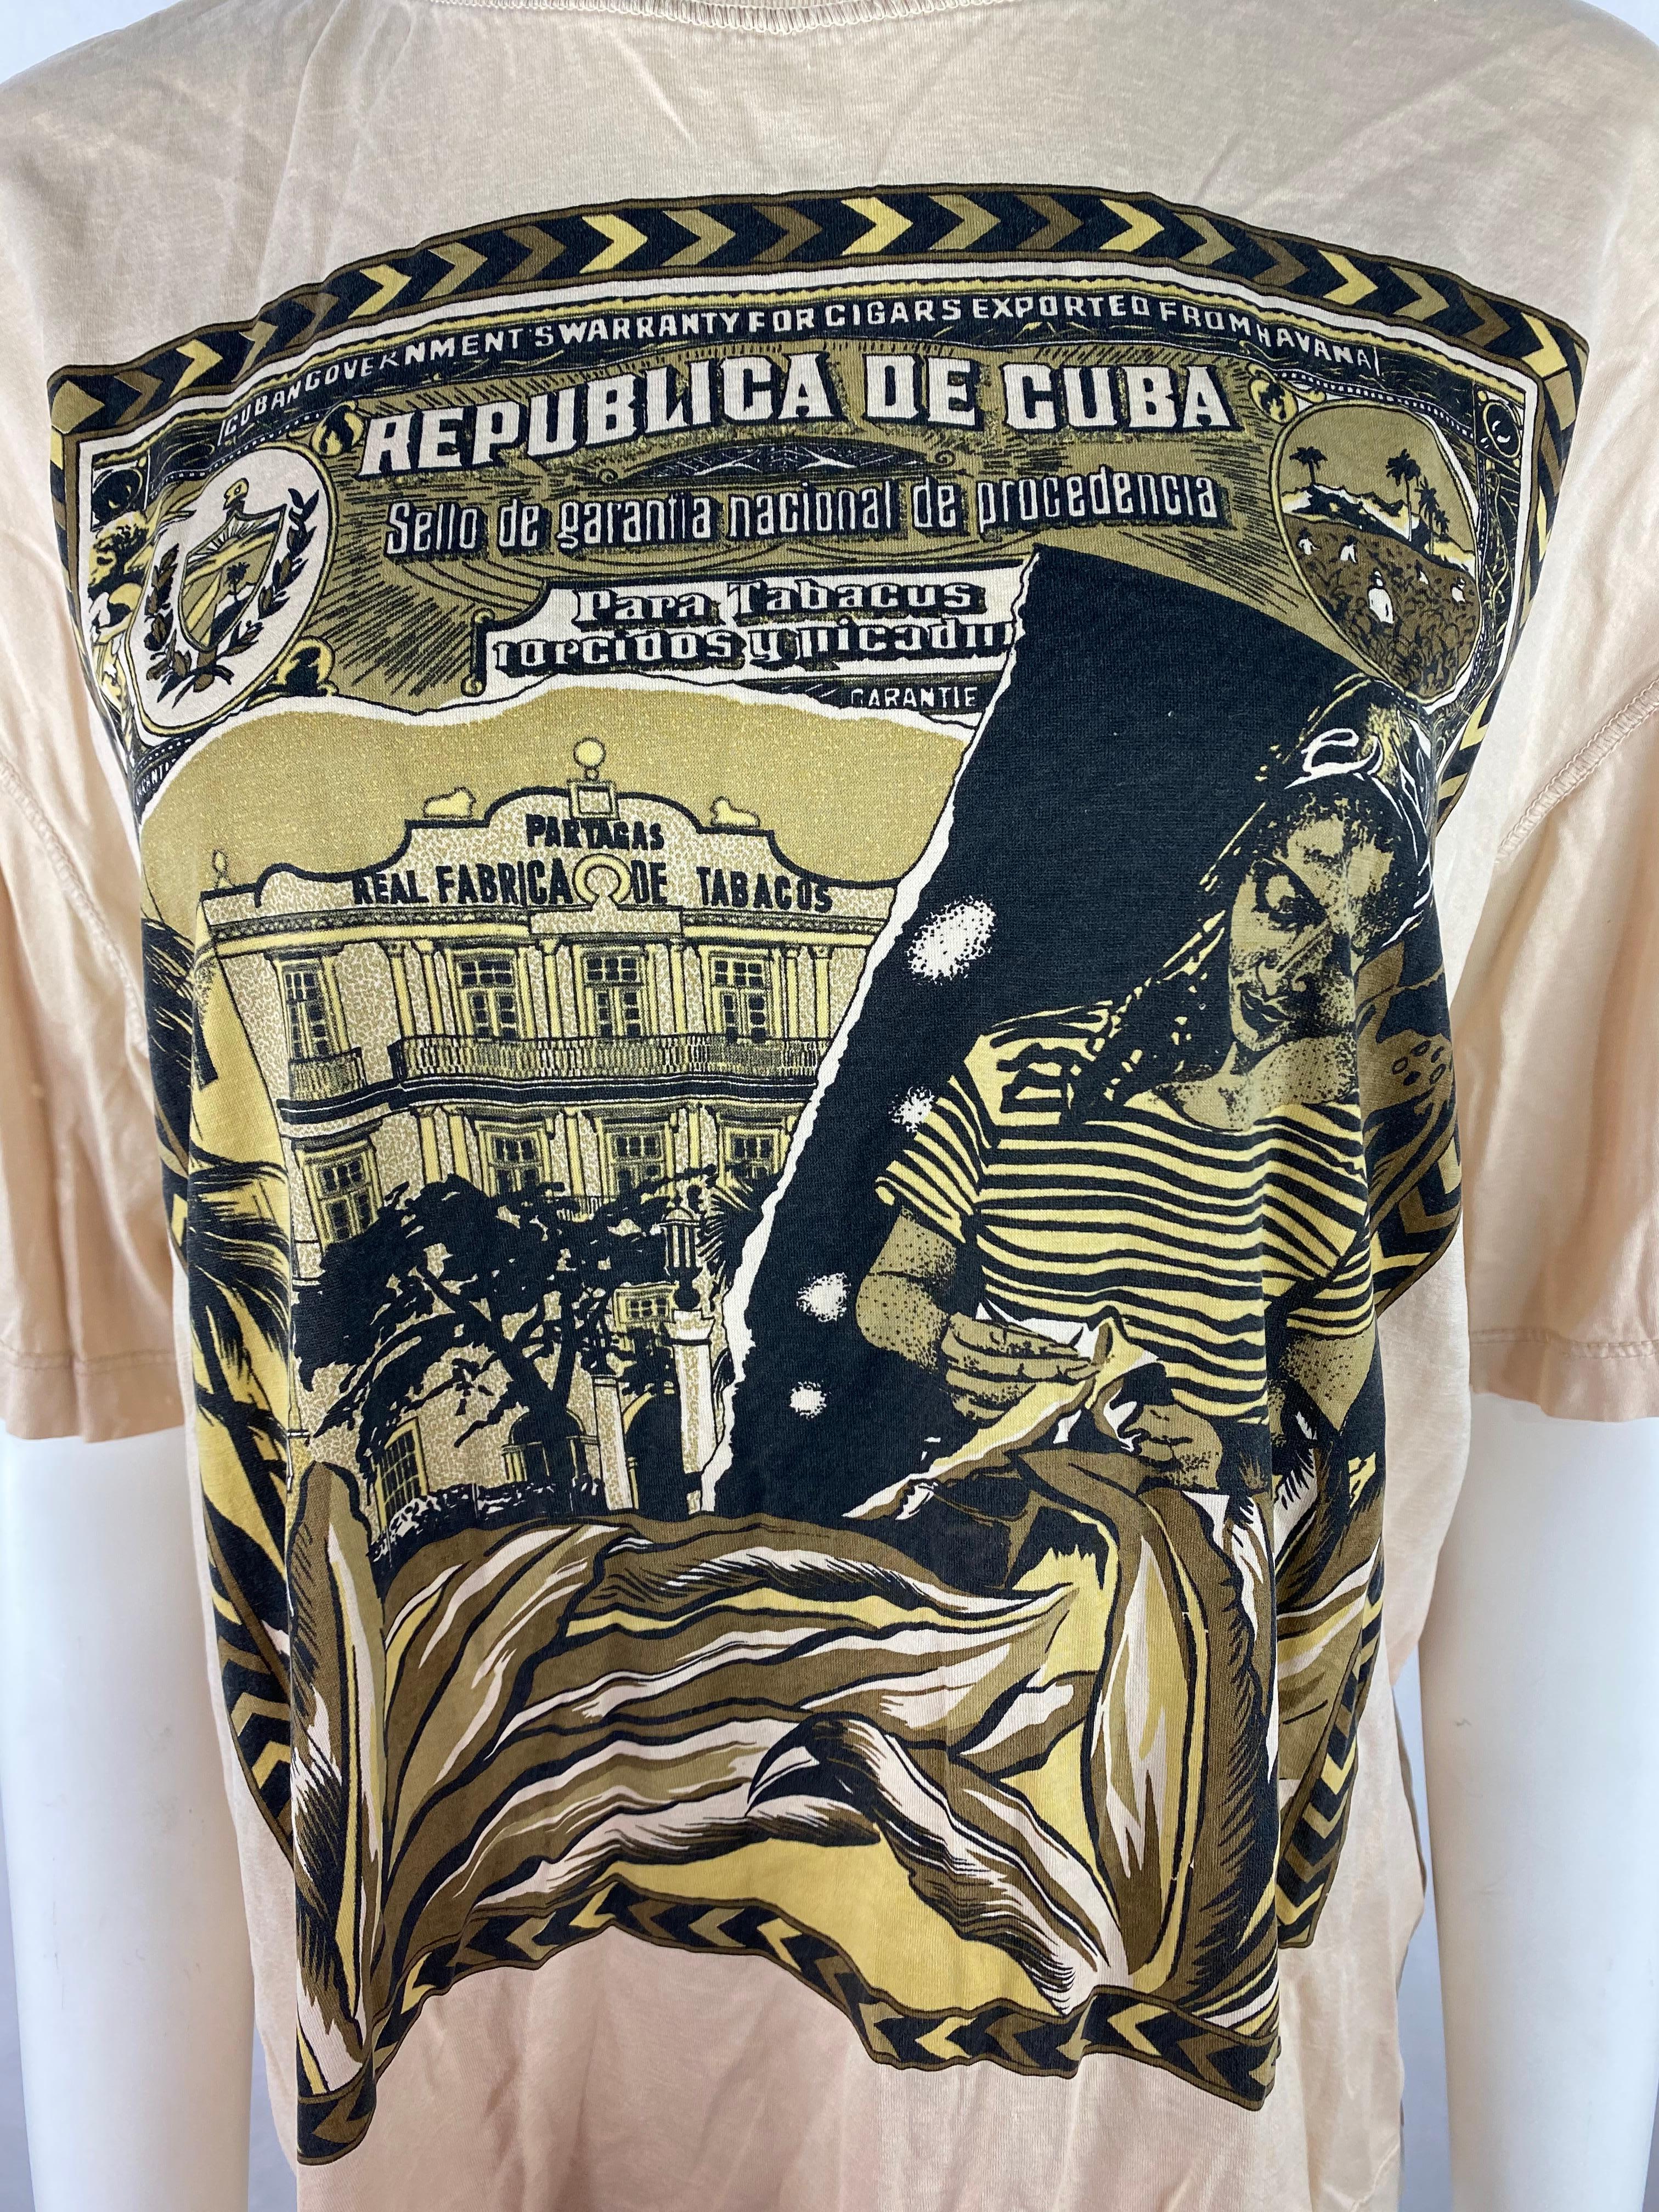 Product details:

The t-shirt features front Cuba gnathic detail and it is made out of cotton.